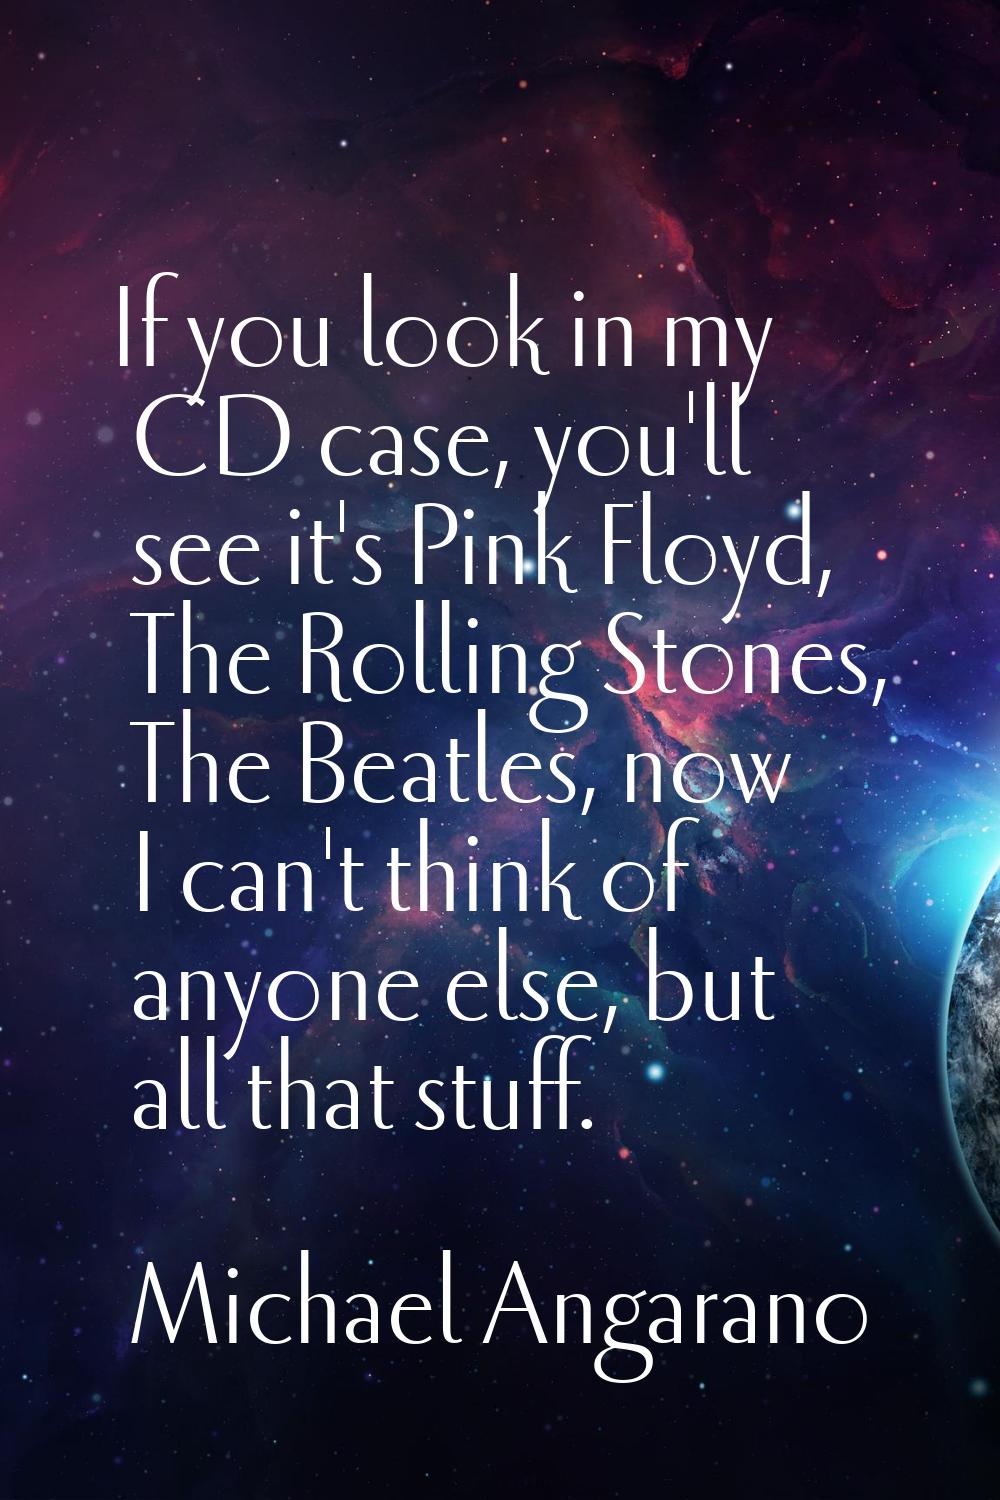 If you look in my CD case, you'll see it's Pink Floyd, The Rolling Stones, The Beatles, now I can't